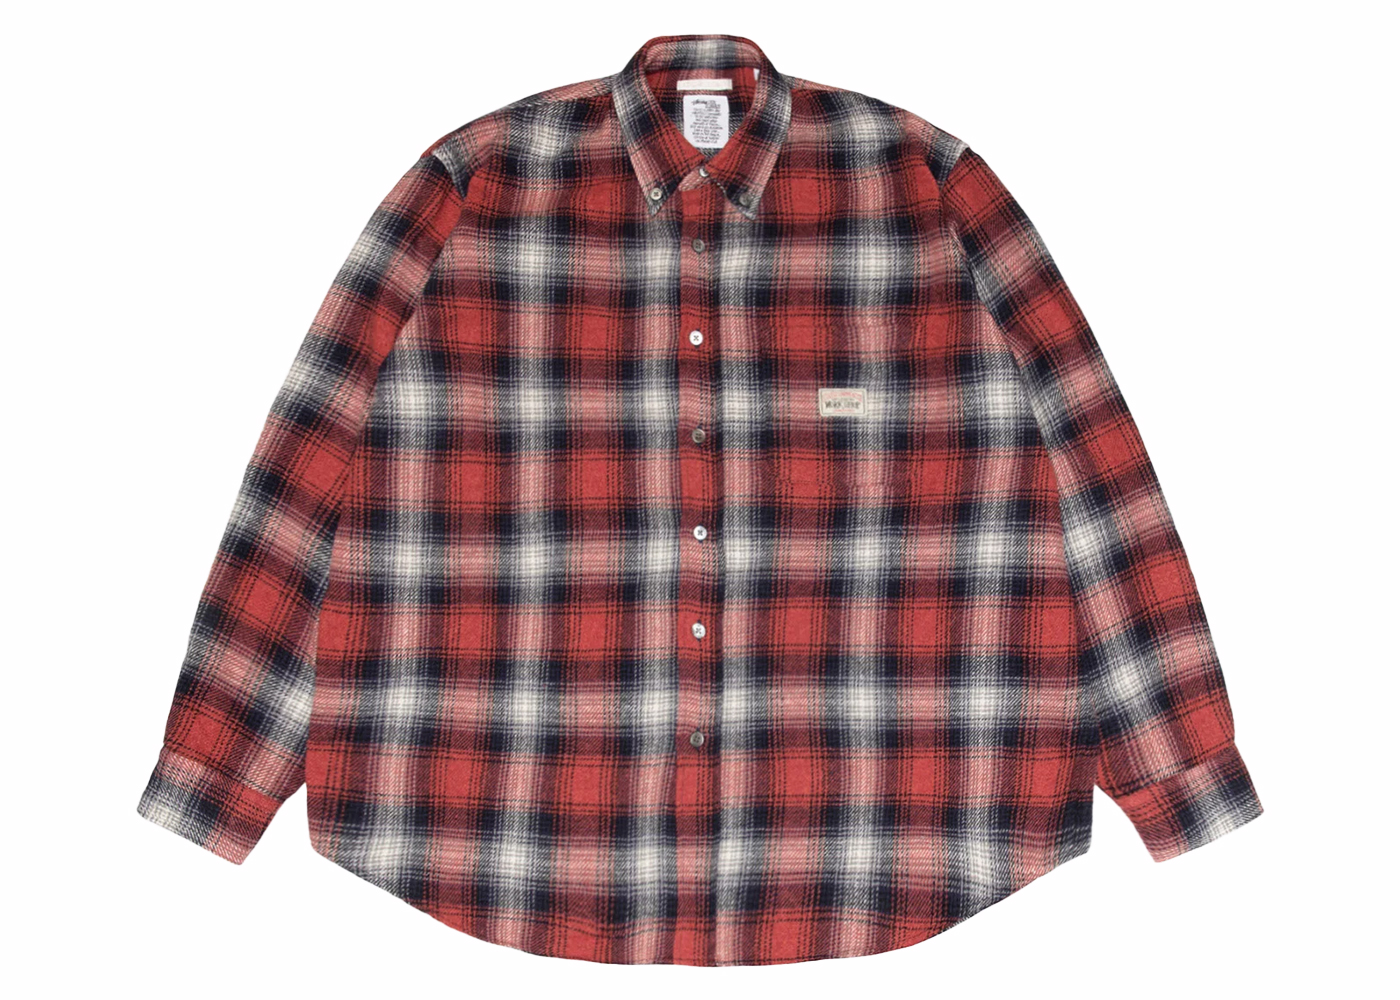 Stussy x Our Legacy Work Shop Shirt Red Arborist Check Men's 